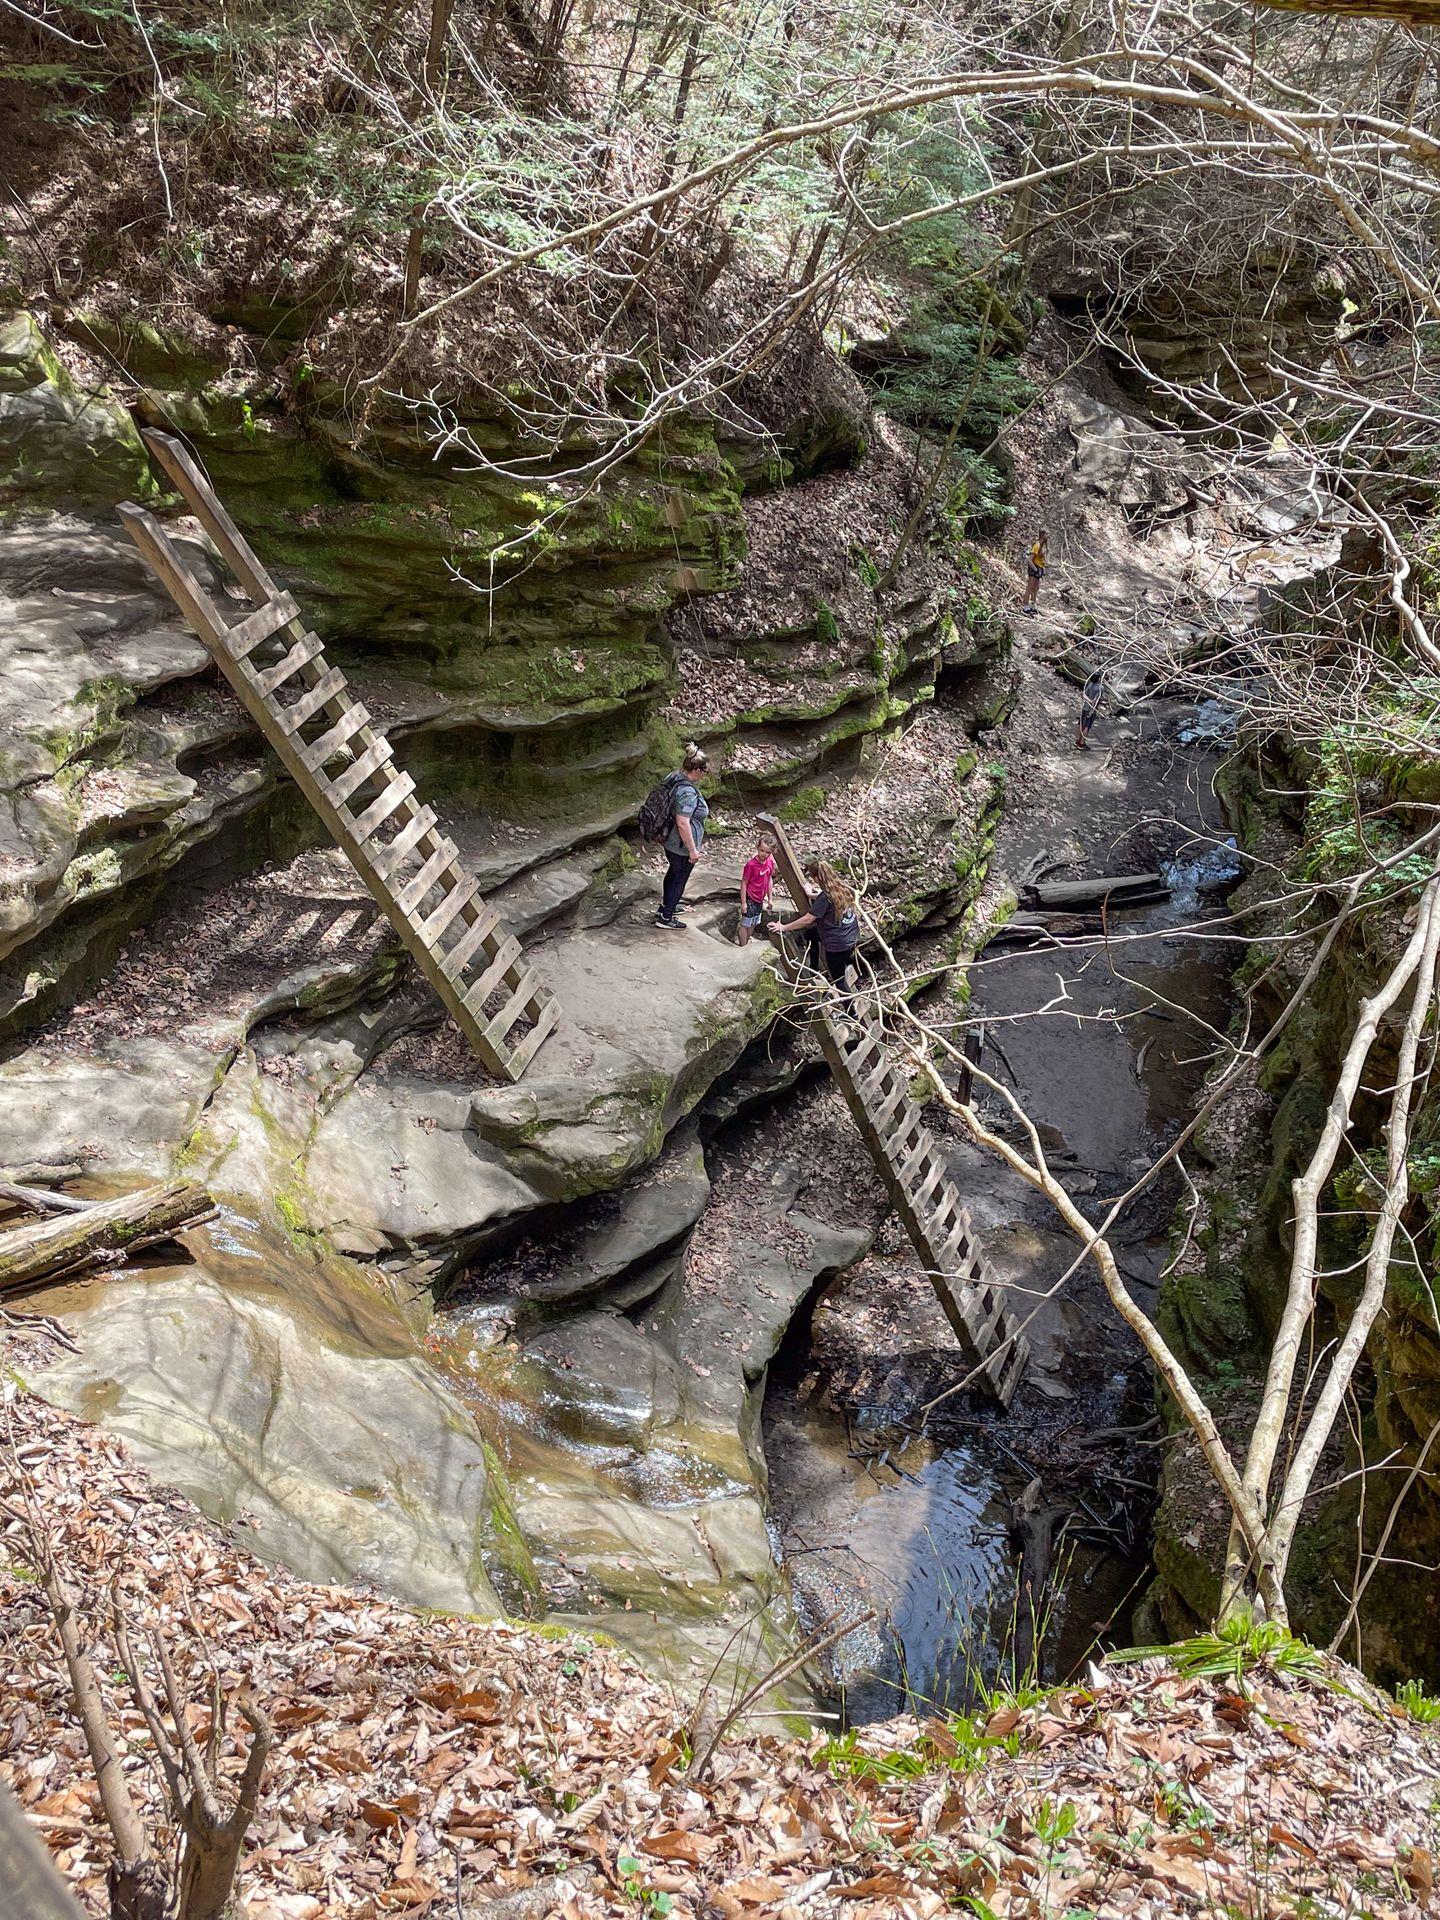 Two large, wooden ladders leading up or down a canyon inside of Turkey Run State Park.